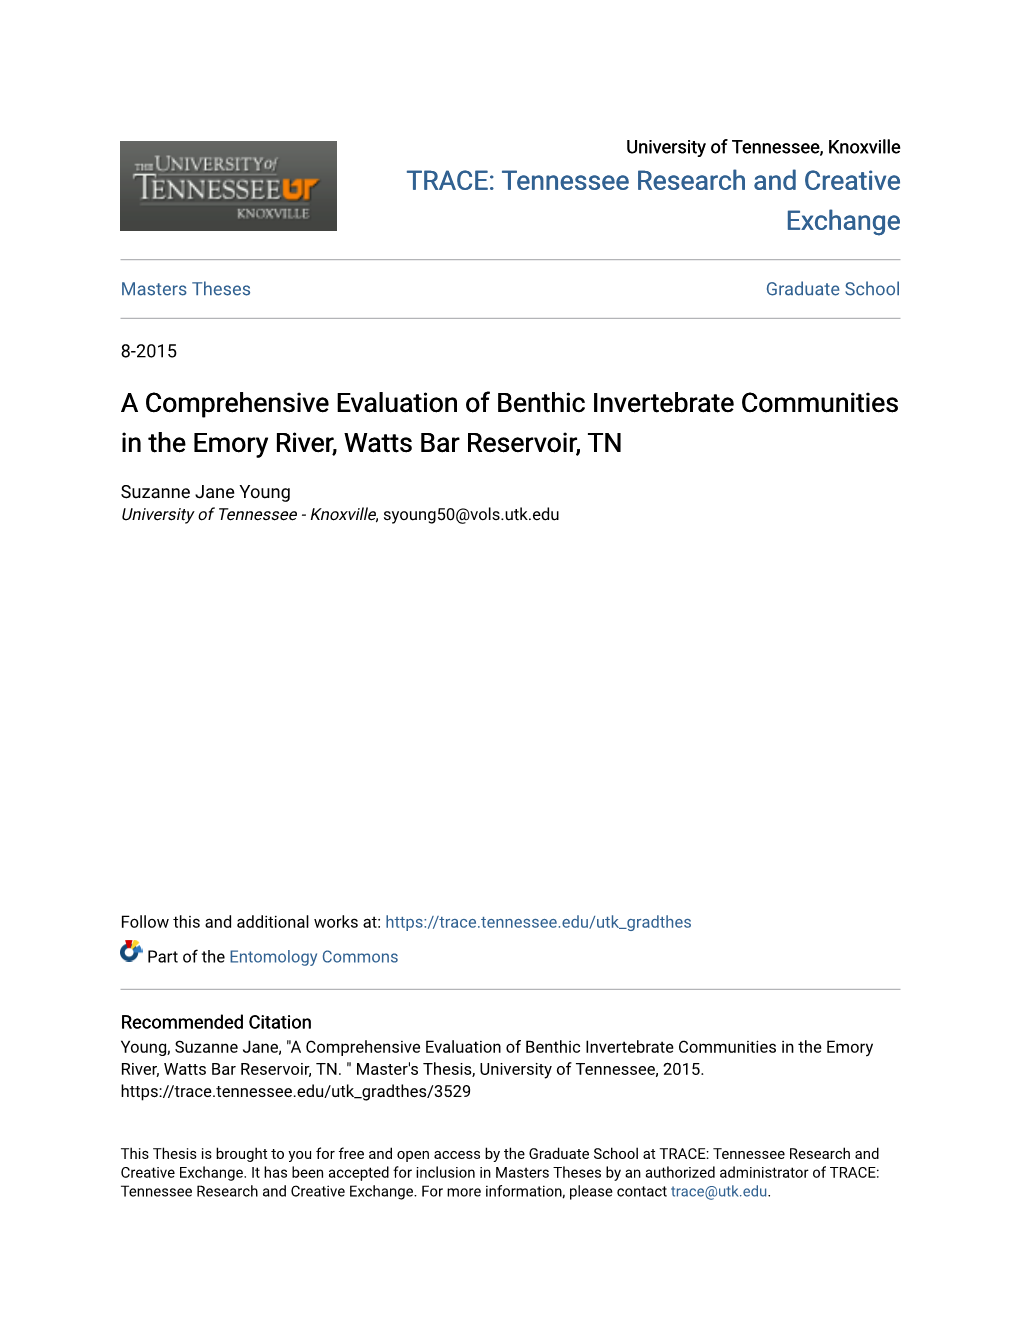 A Comprehensive Evaluation of Benthic Invertebrate Communities in the Emory River, Watts Bar Reservoir, TN